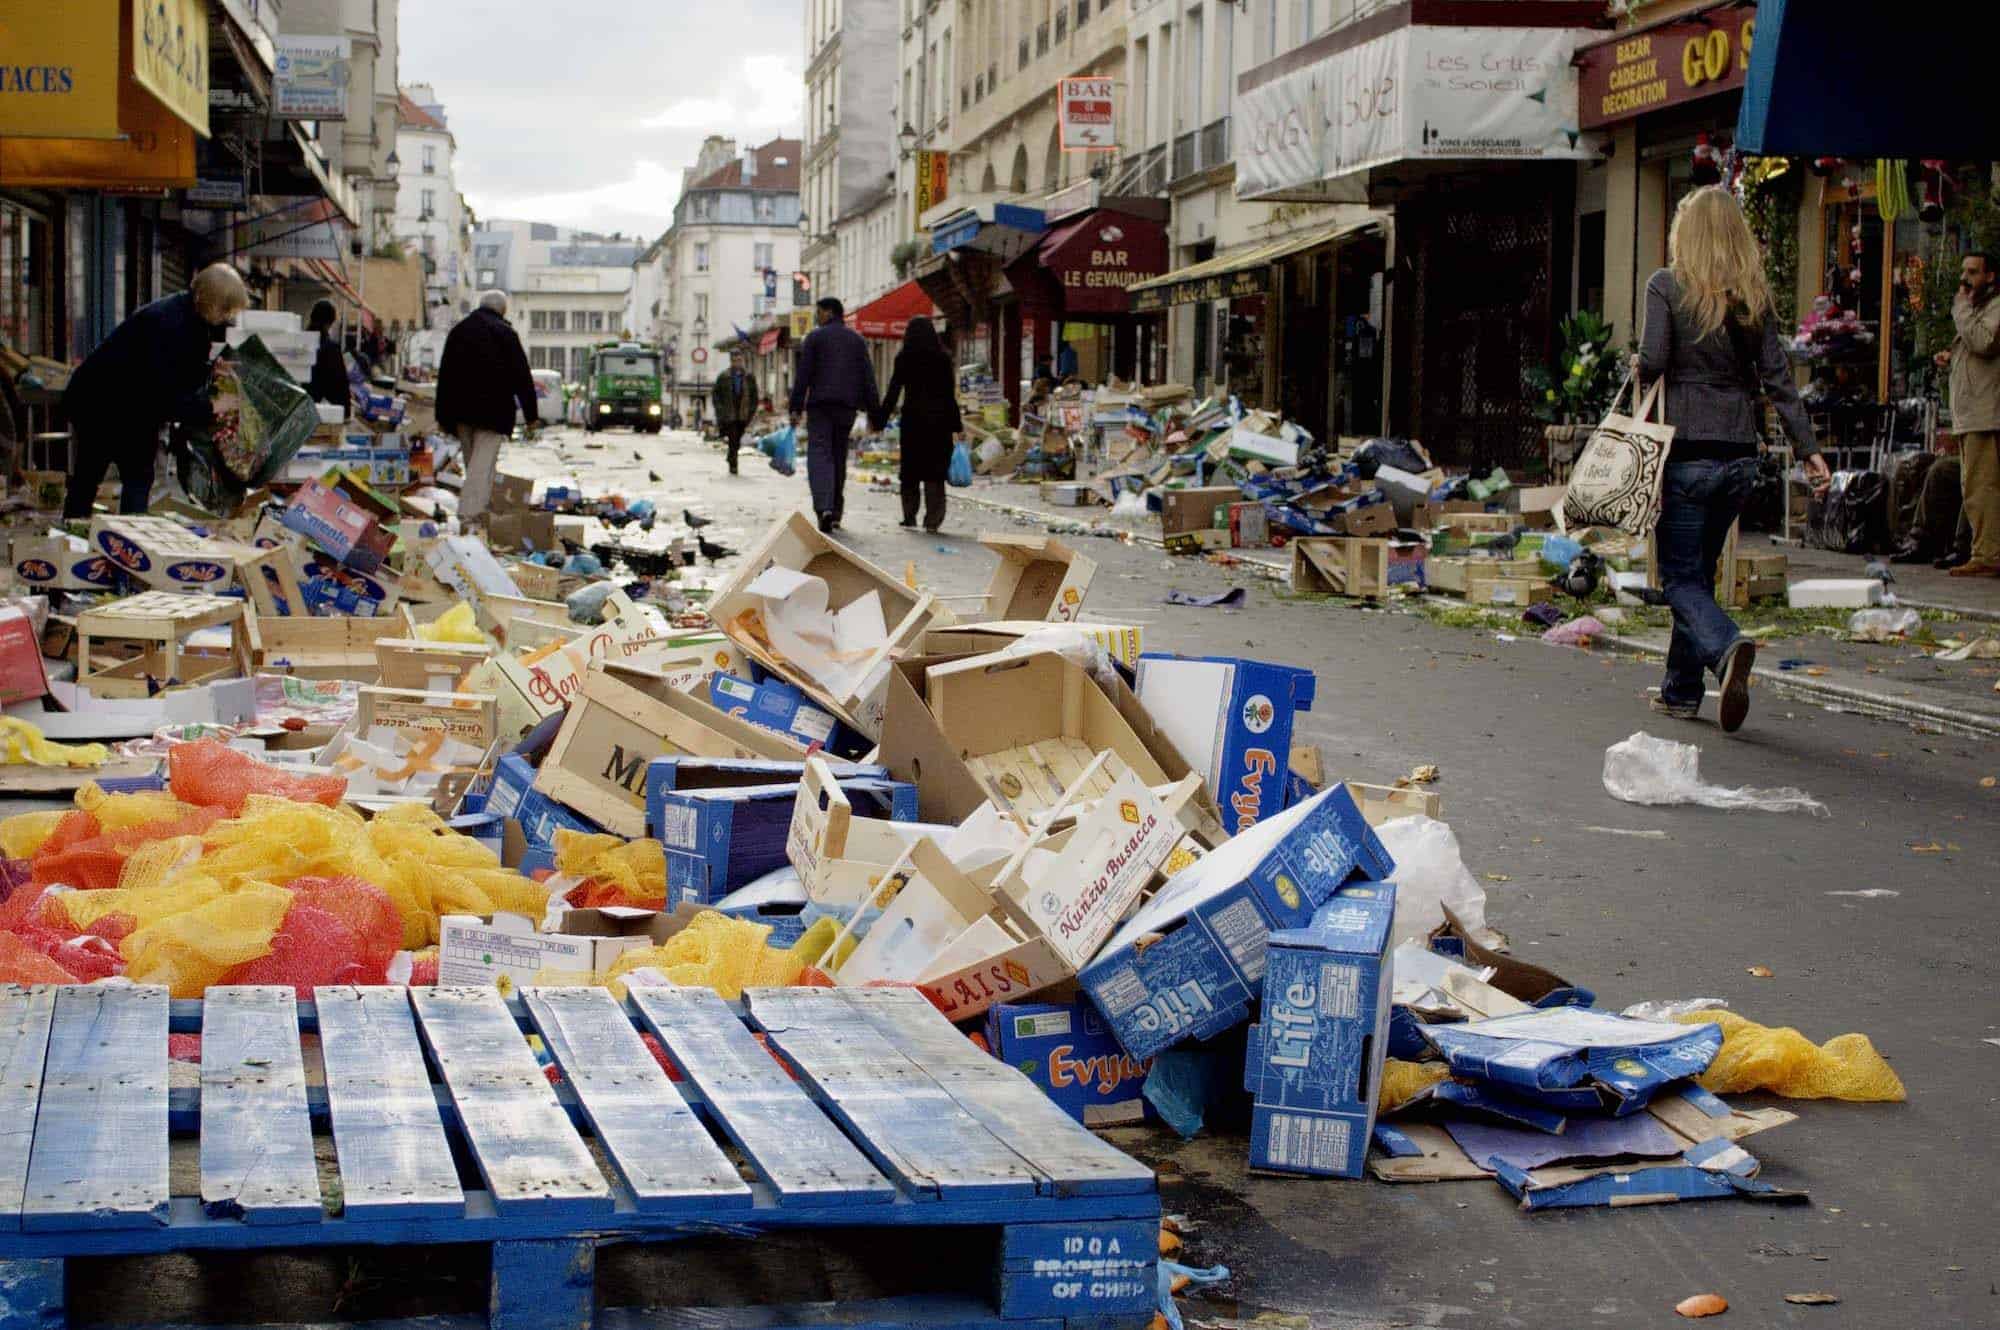 The waste after market days in Paris - HiP Paris Blog covers France's plastic ban which aims to reduce single-use plastic waste, linked to climate change and other environmental threats.